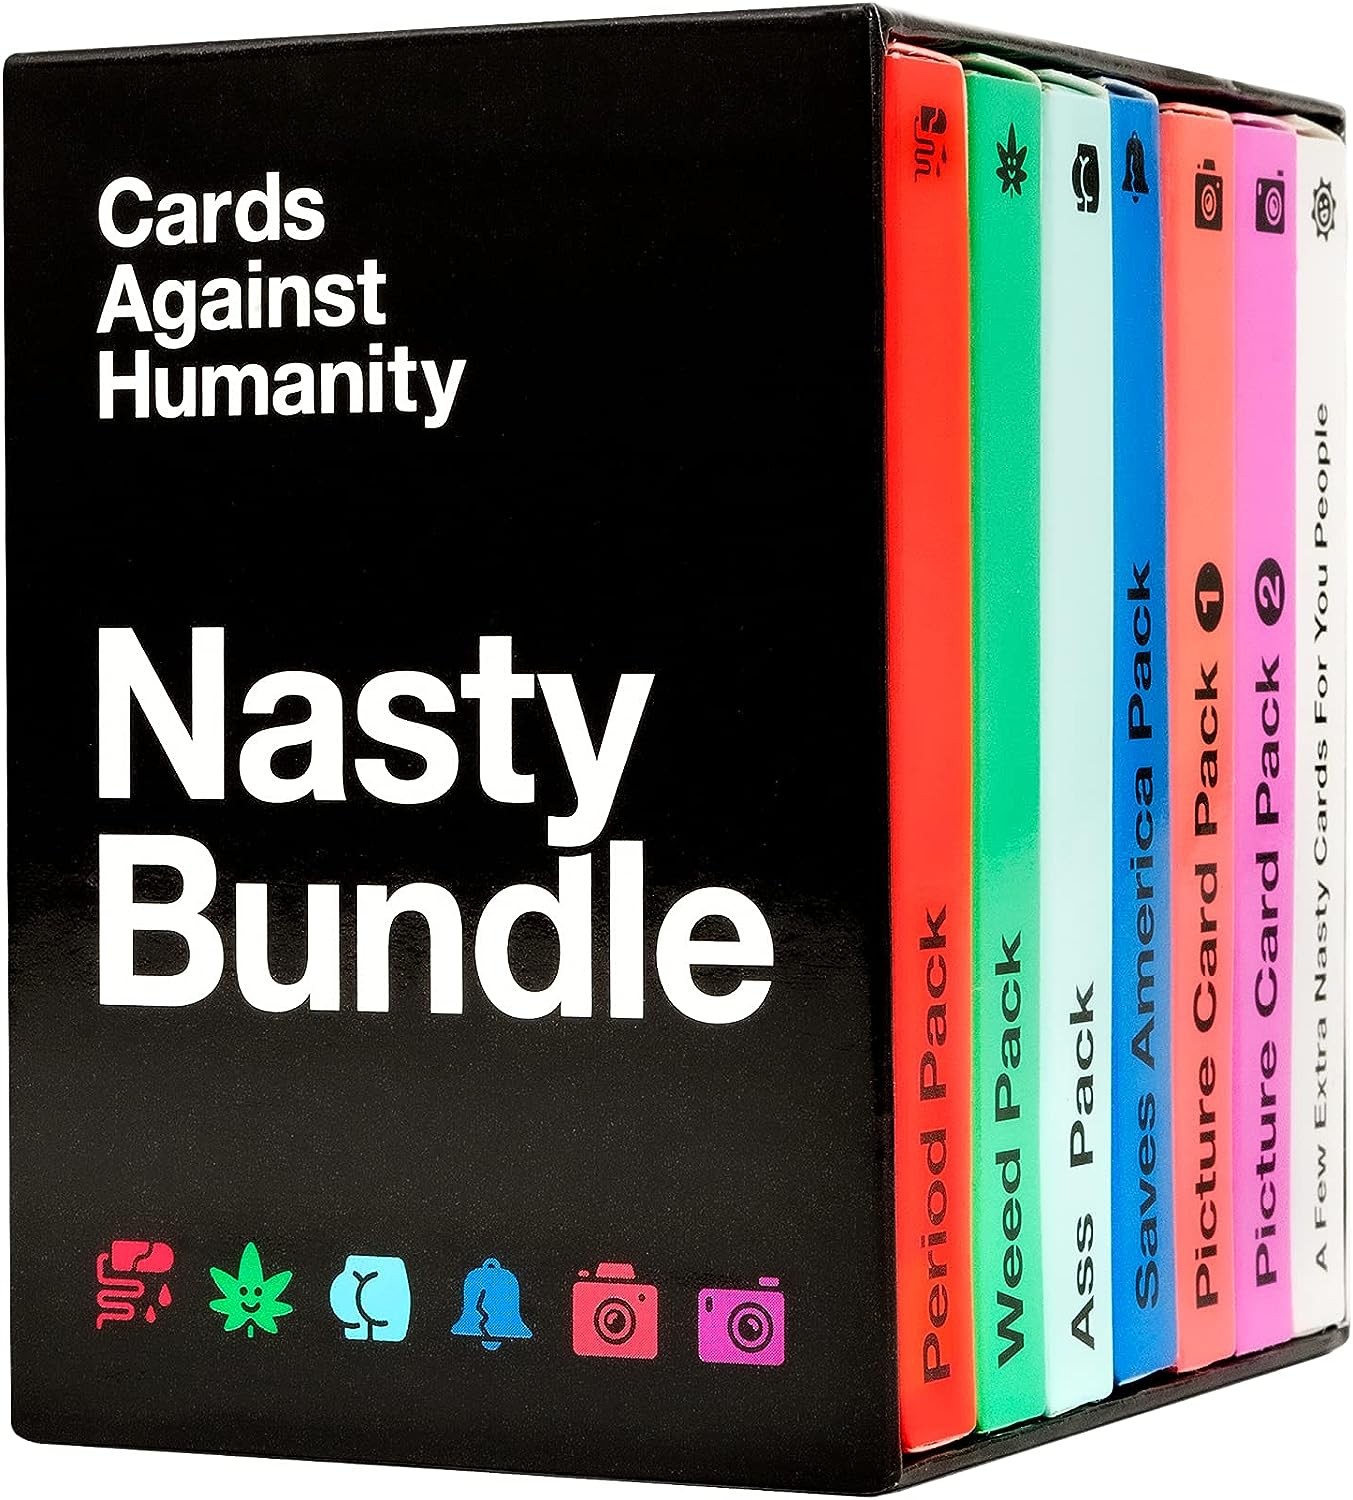 Cards Against Humanity: The Cult Favorite